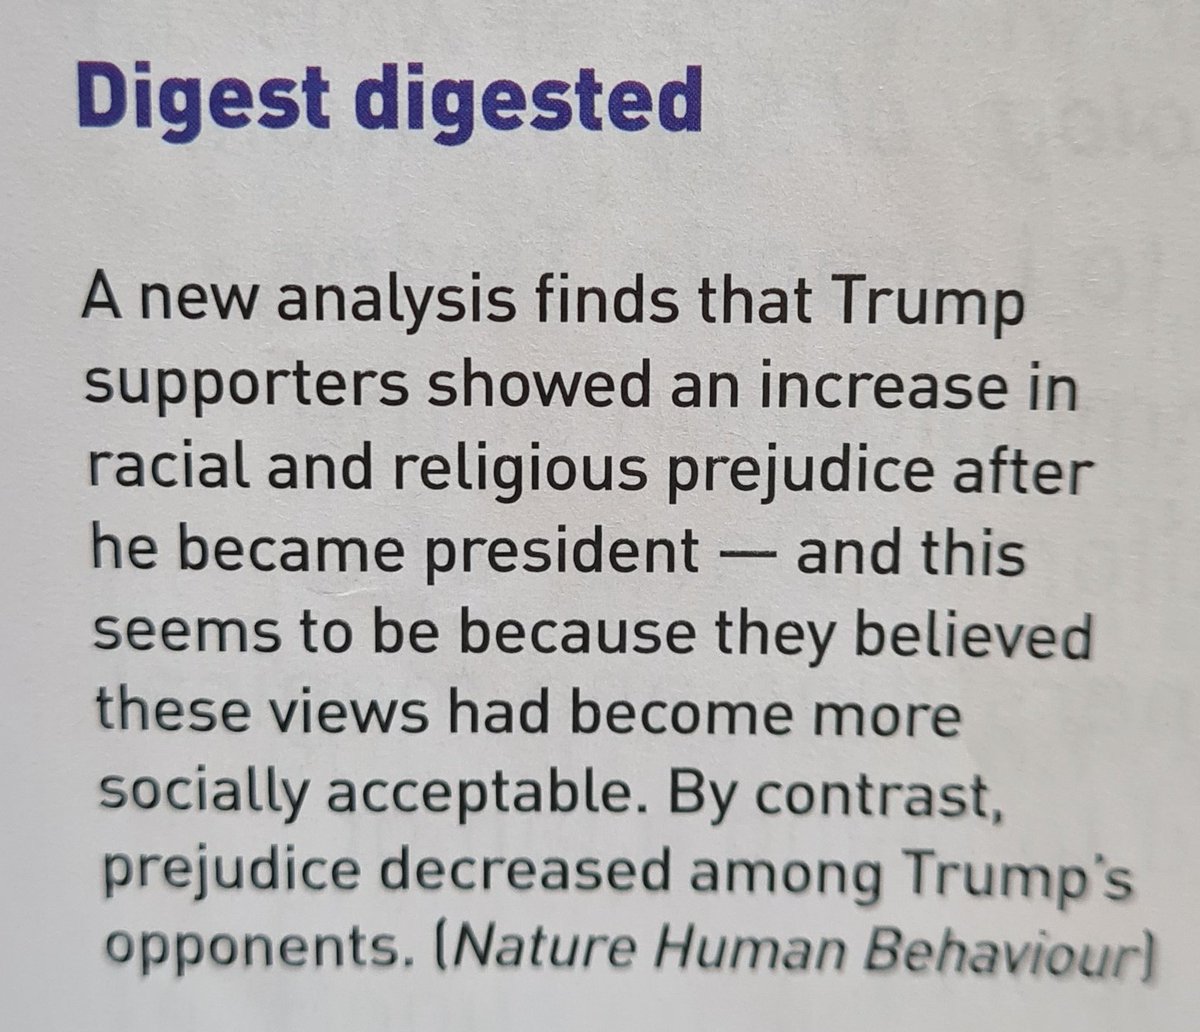 An interesting pithy reference to research article in Nature Human Behaviour (now in context of #Jan6Hearings) mentioned monthly psychology magazine The Psychologist, June 2022, on  prejudice  acceptability of beliefs, ... and Trump @psychmag > >